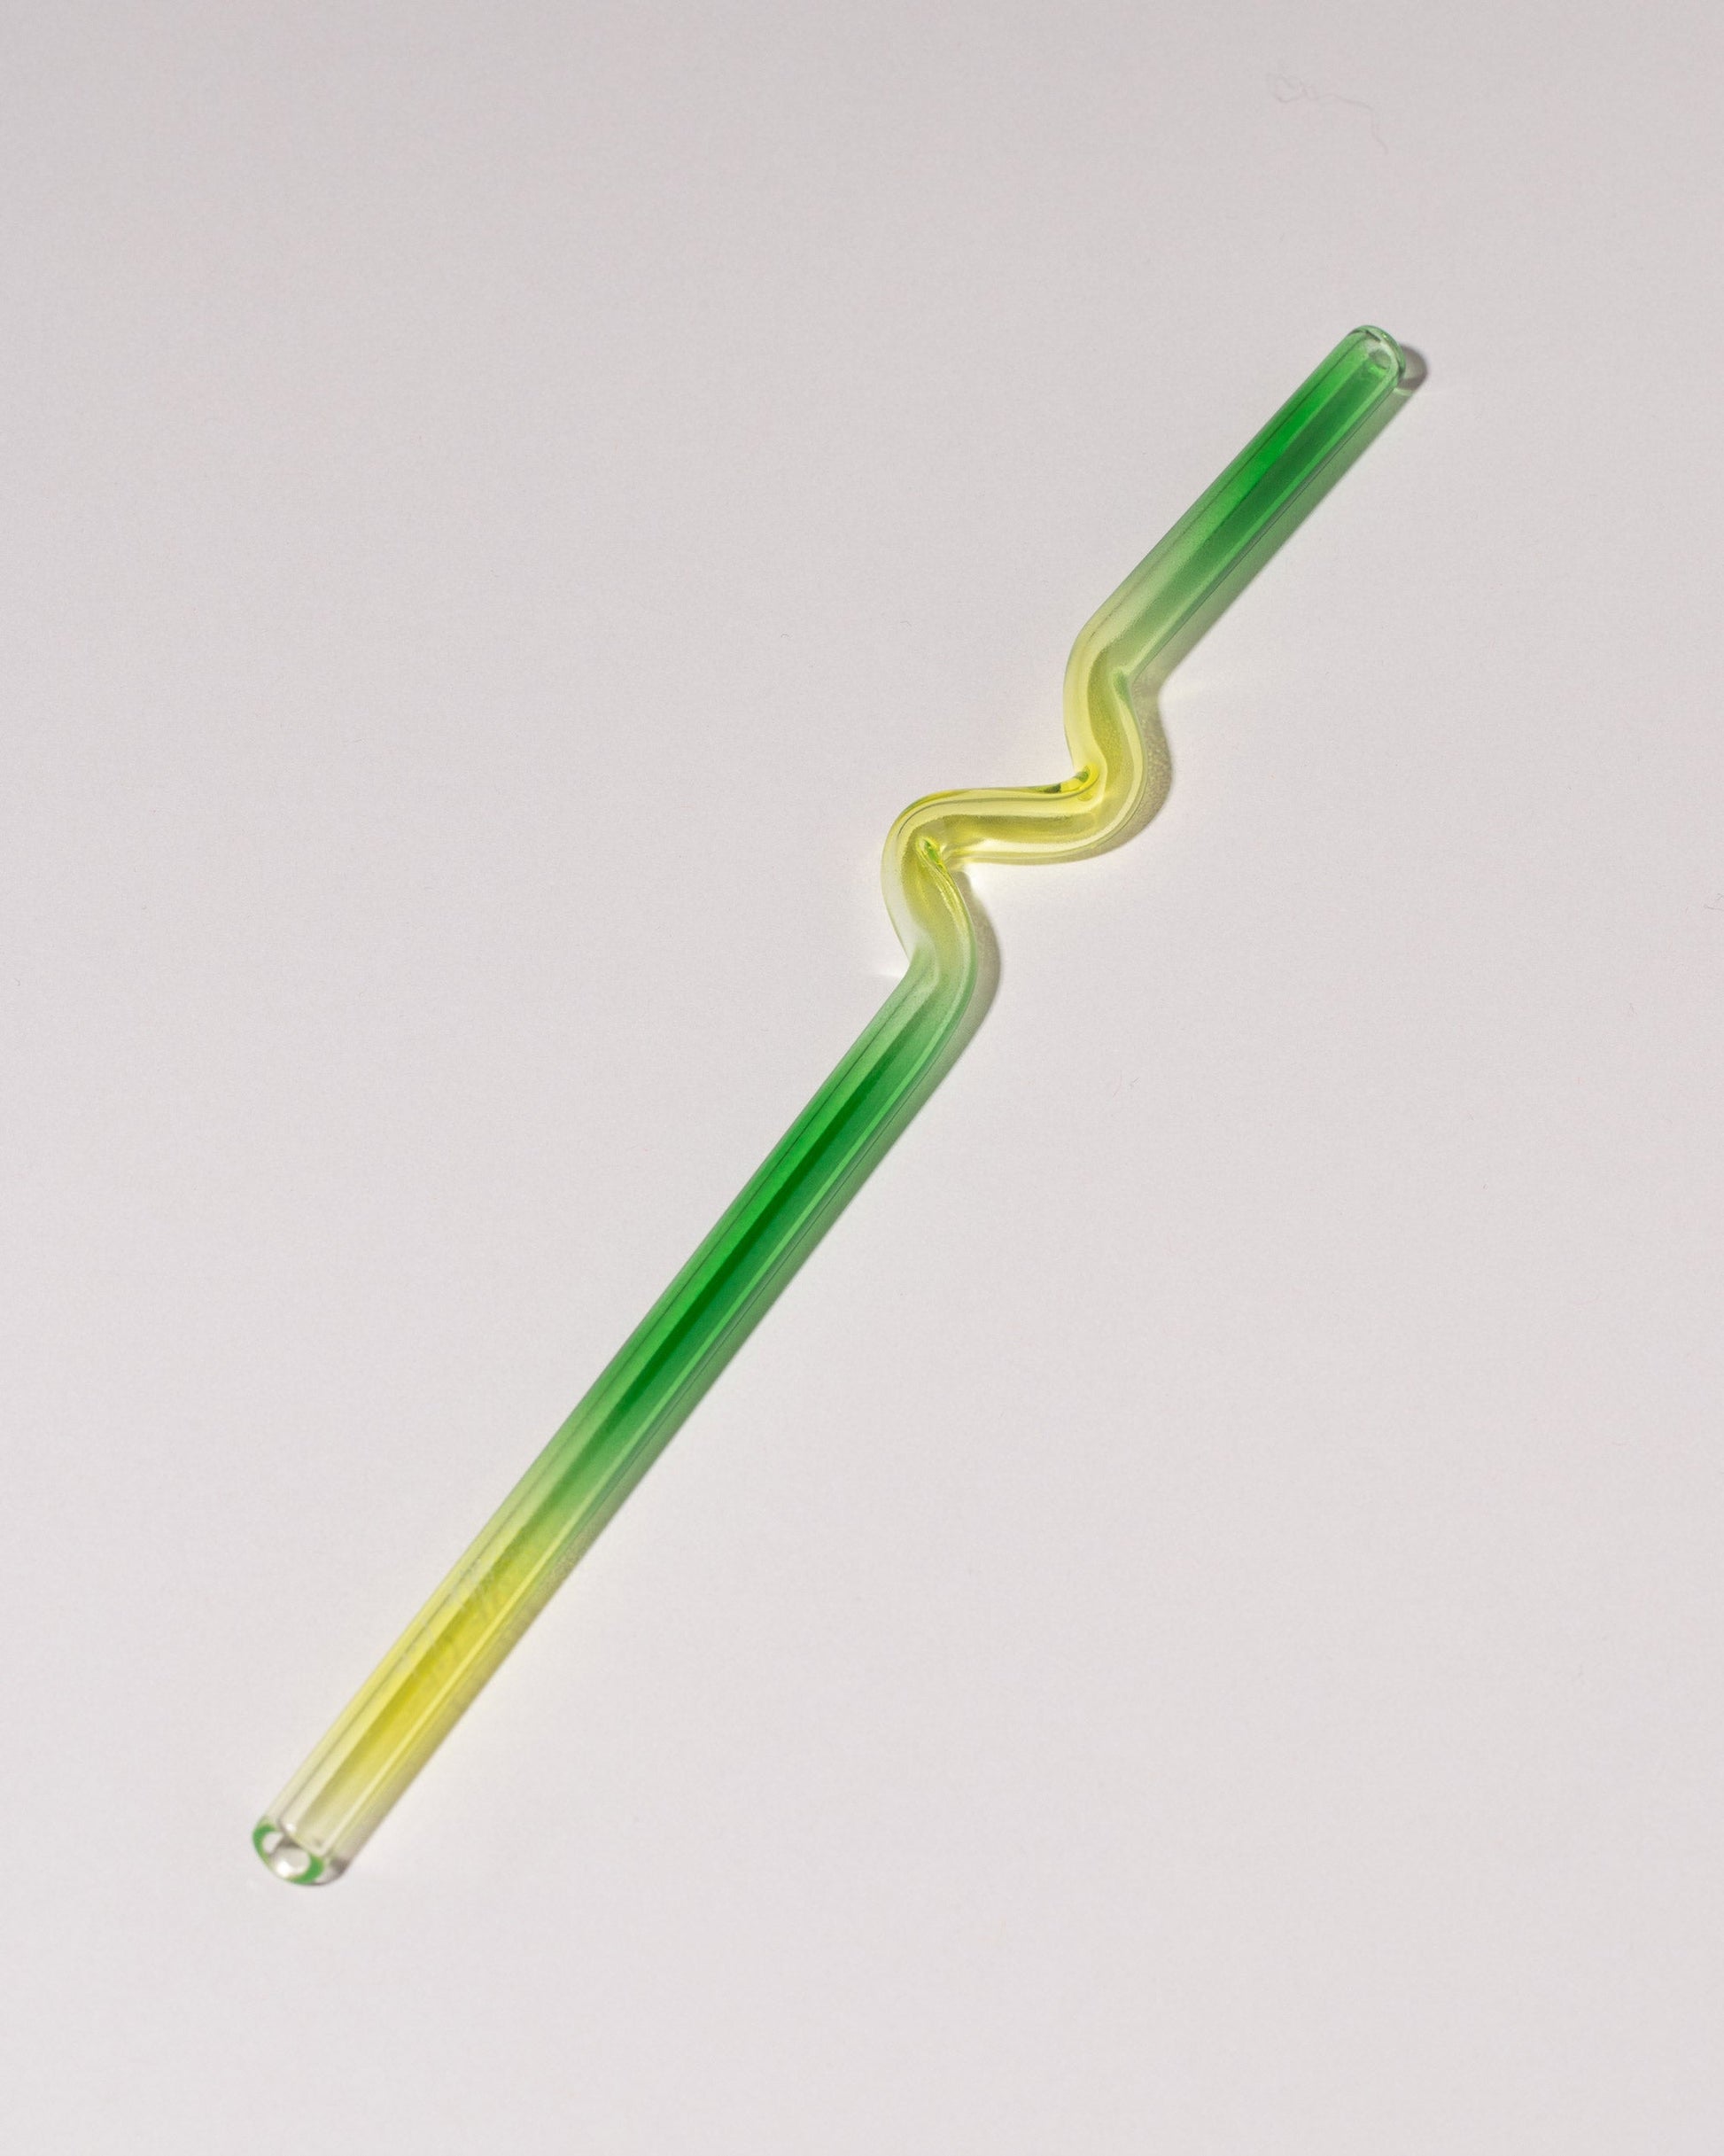  Misha Kahn Yellow and Green Suck It Up Glass Straw on light color background.